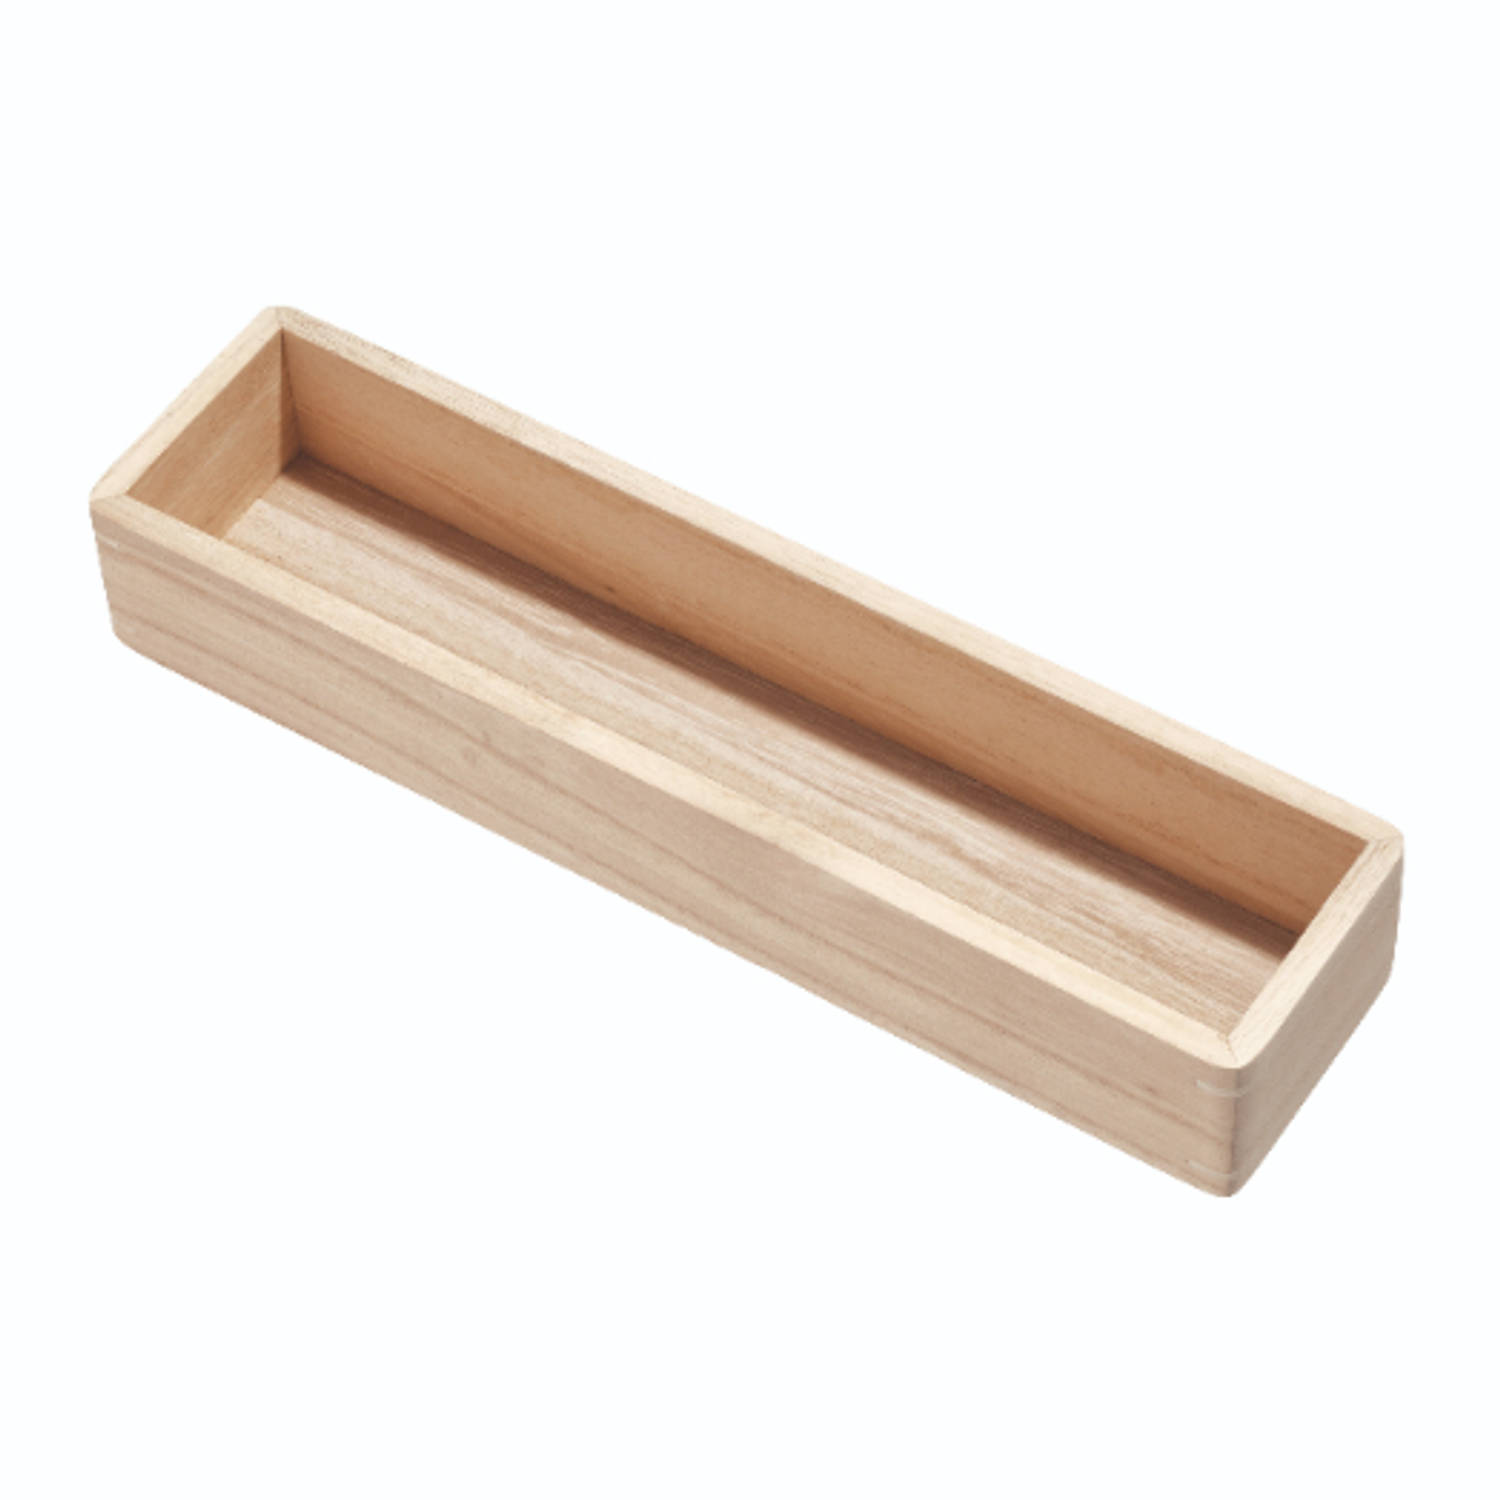 The Home Edit bakjes lade - Wooden Collection - Hout - Duurzaam